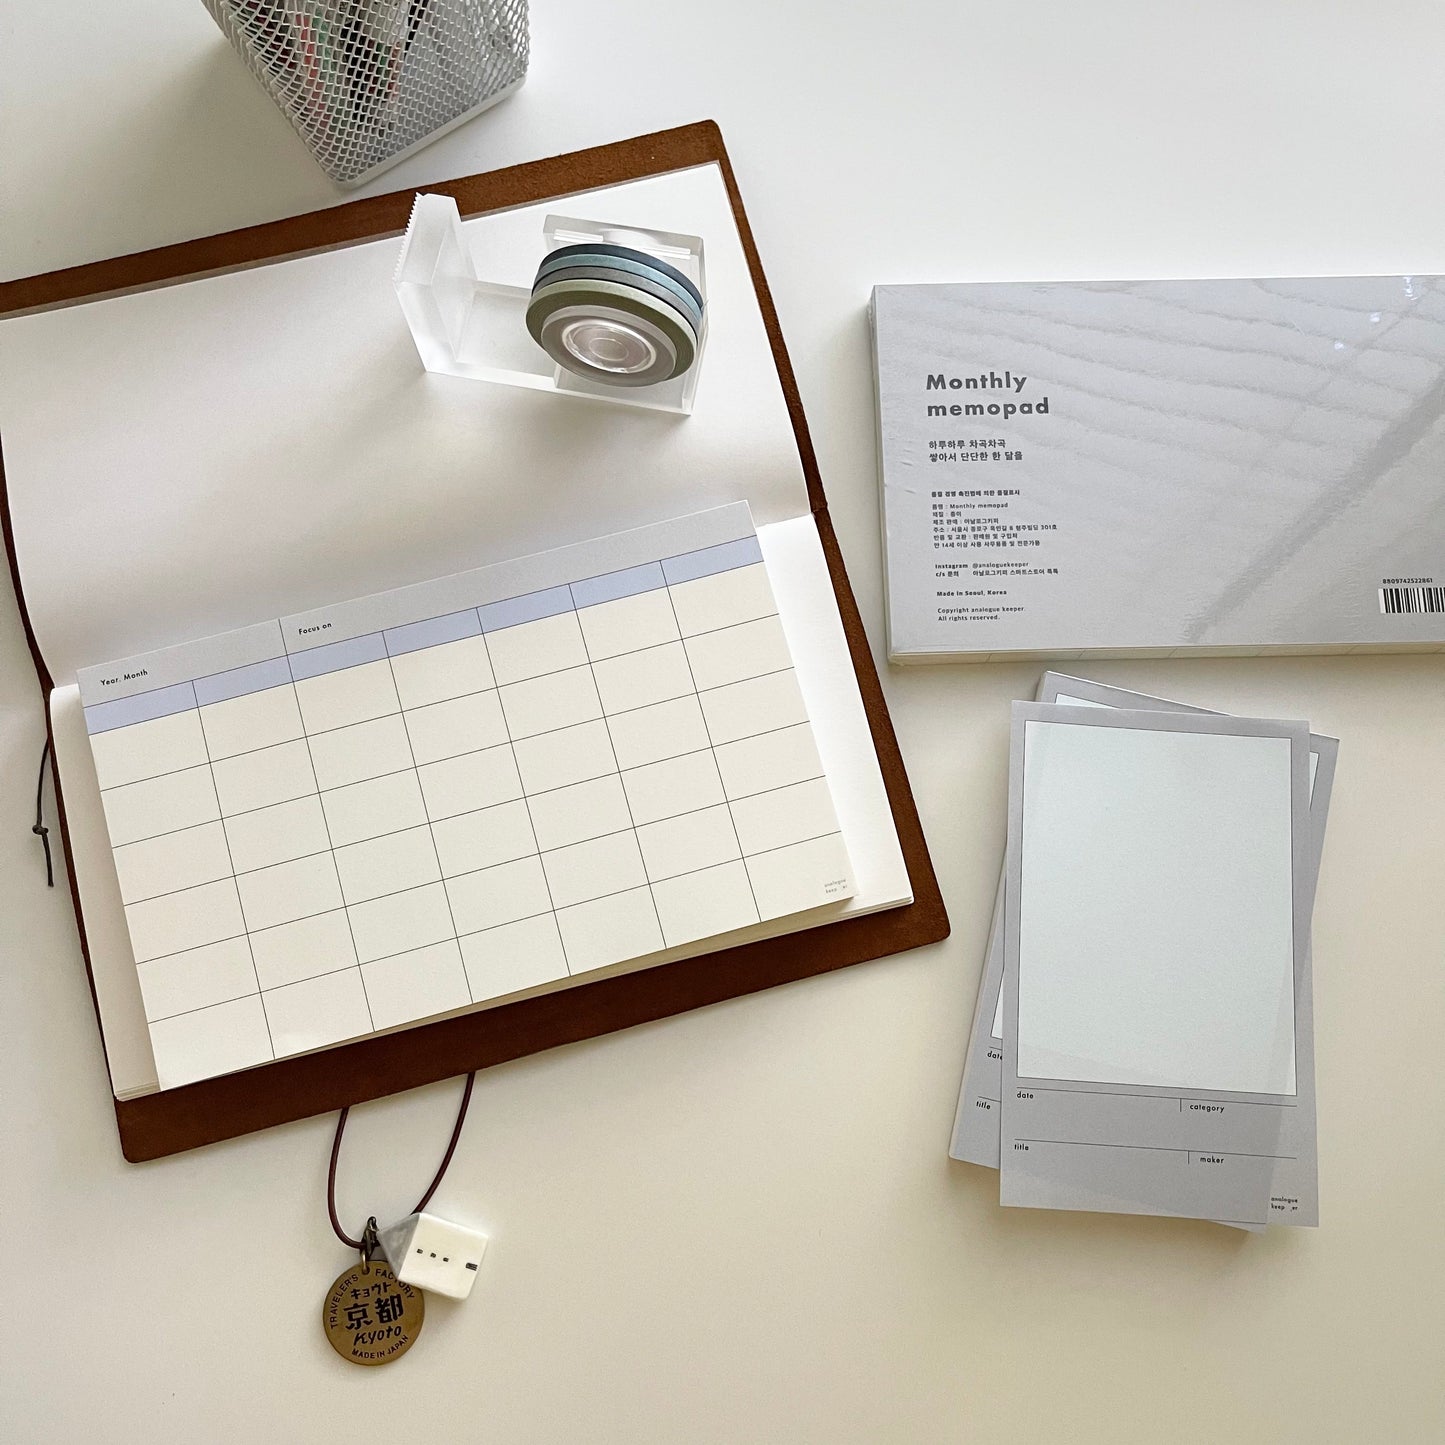 Analogue Keeper NEW Monthly Memo Pad